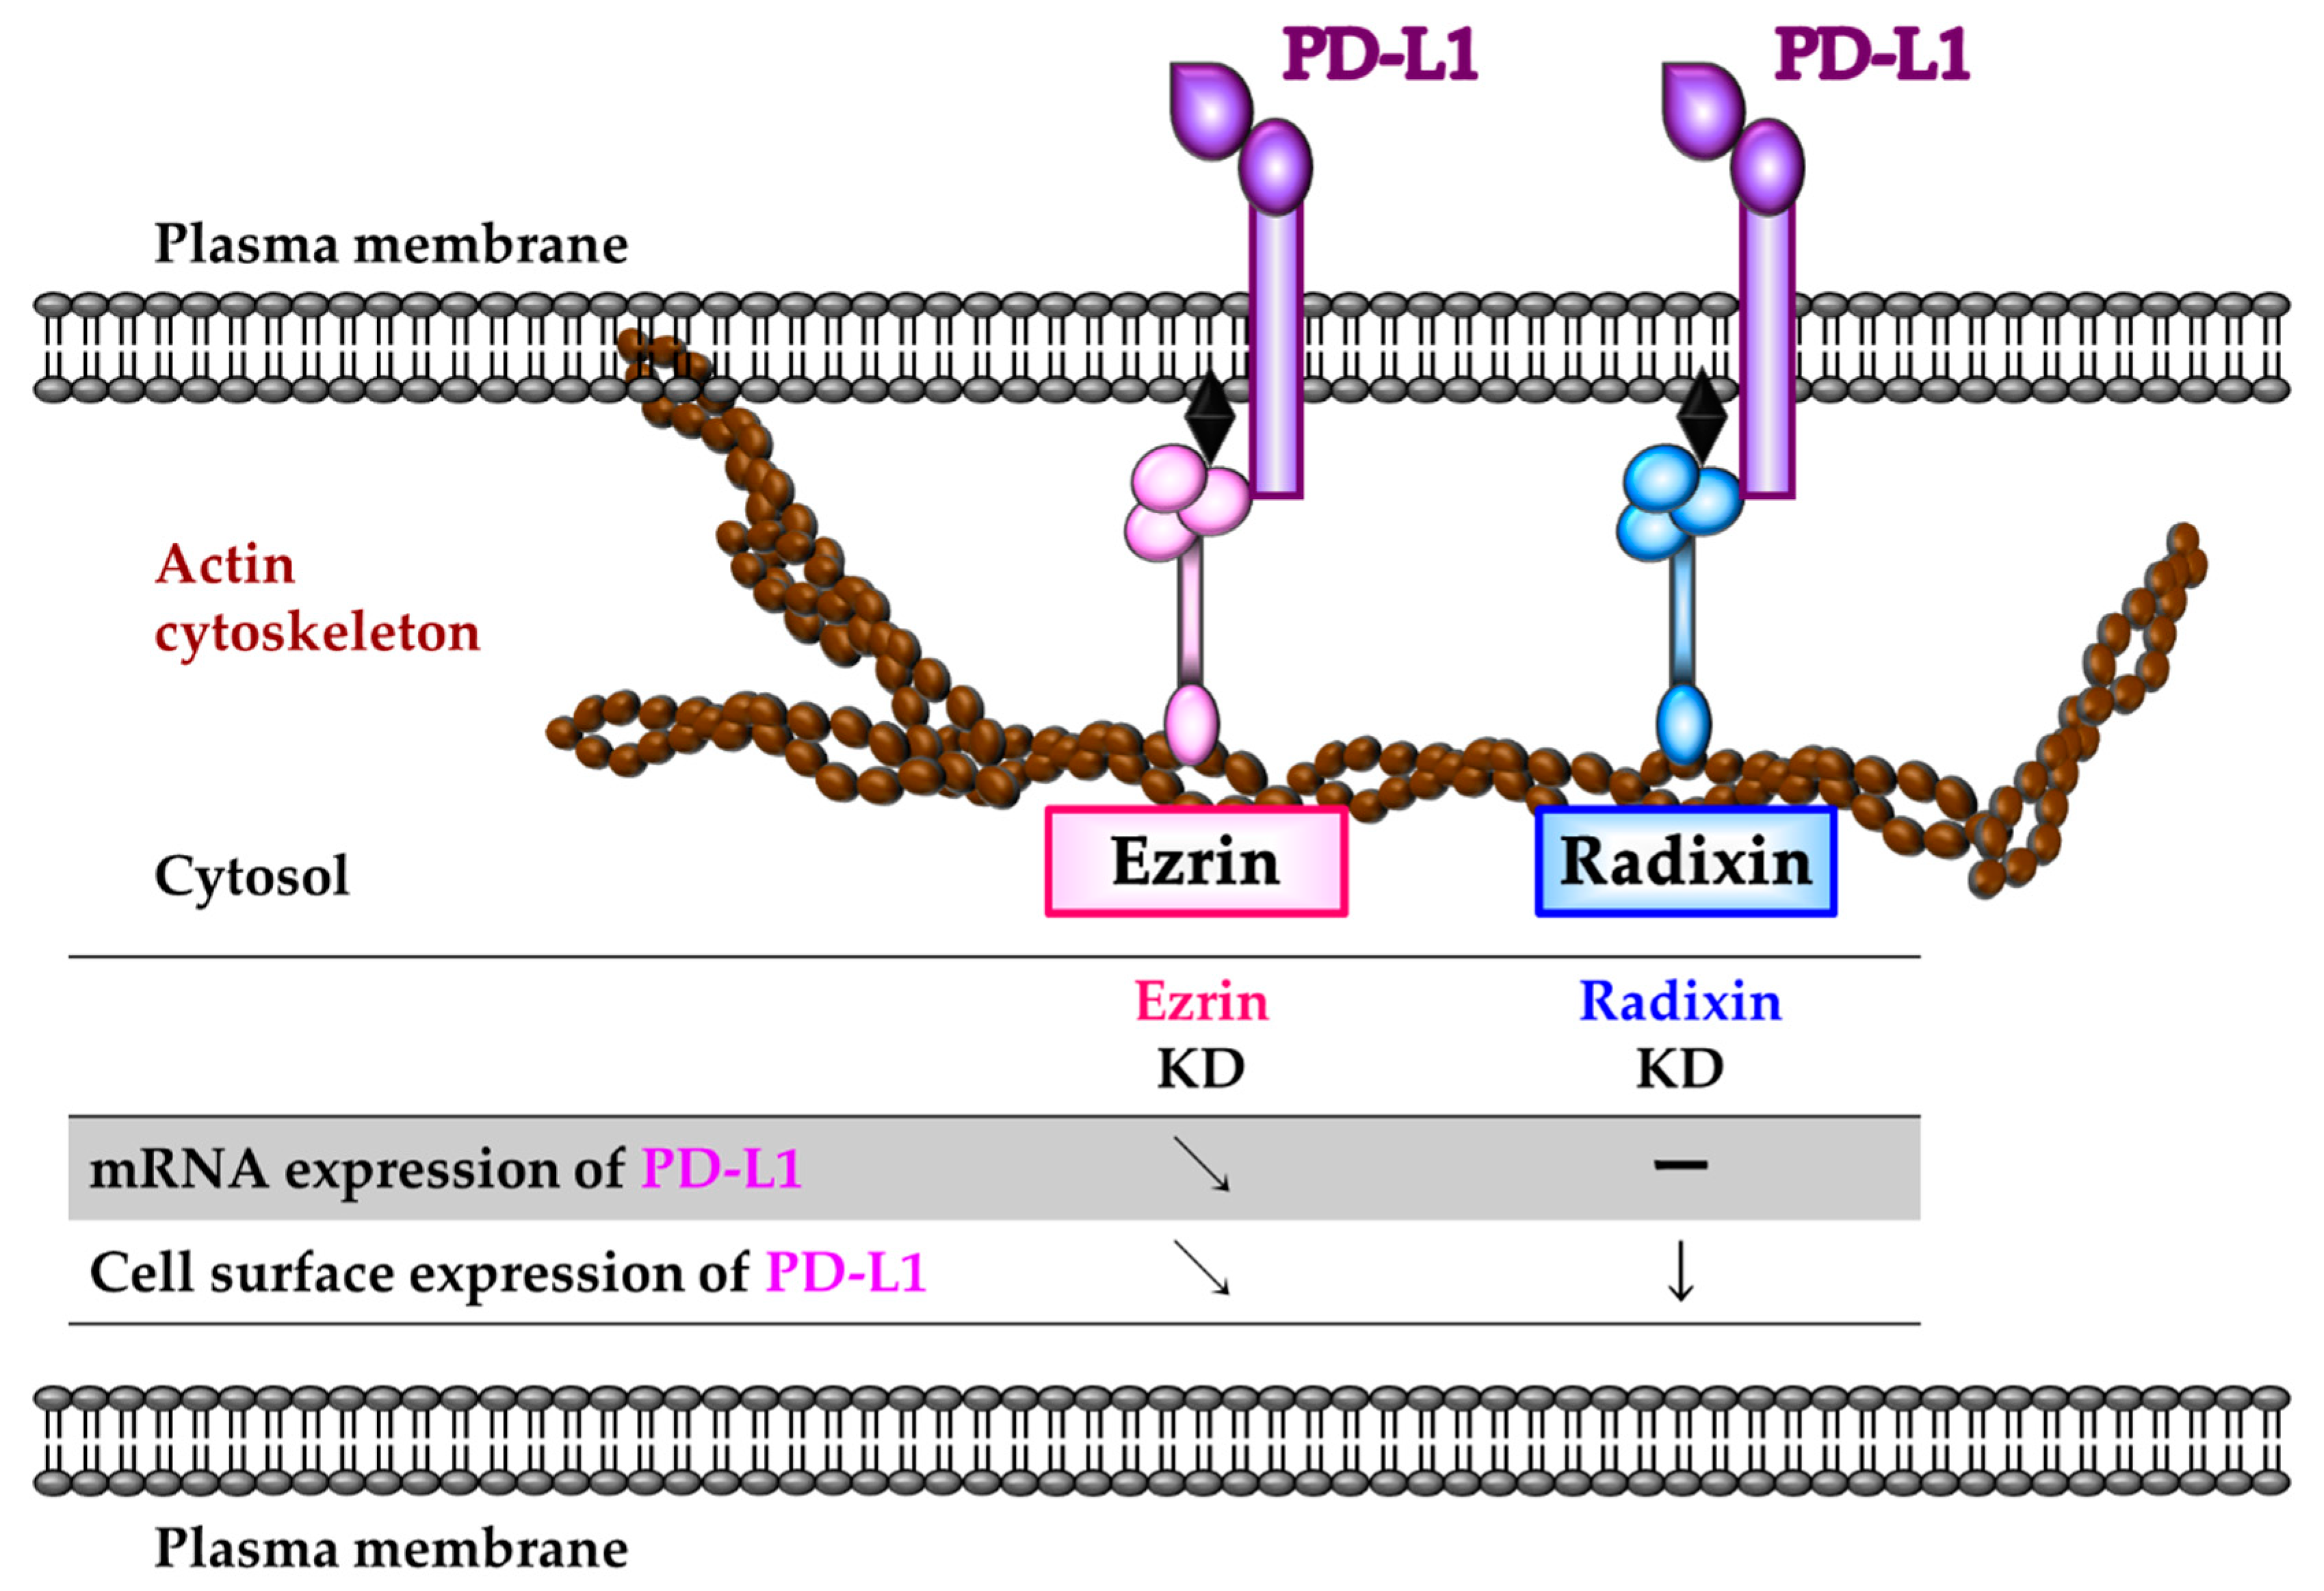 Immuno | Free Full-Text | Ezrin and Radixin Differentially Modulate Cell  Surface Expression of Programmed Death Ligand-1 in Human Pancreatic Ductal  Adenocarcinoma KP-2 Cells